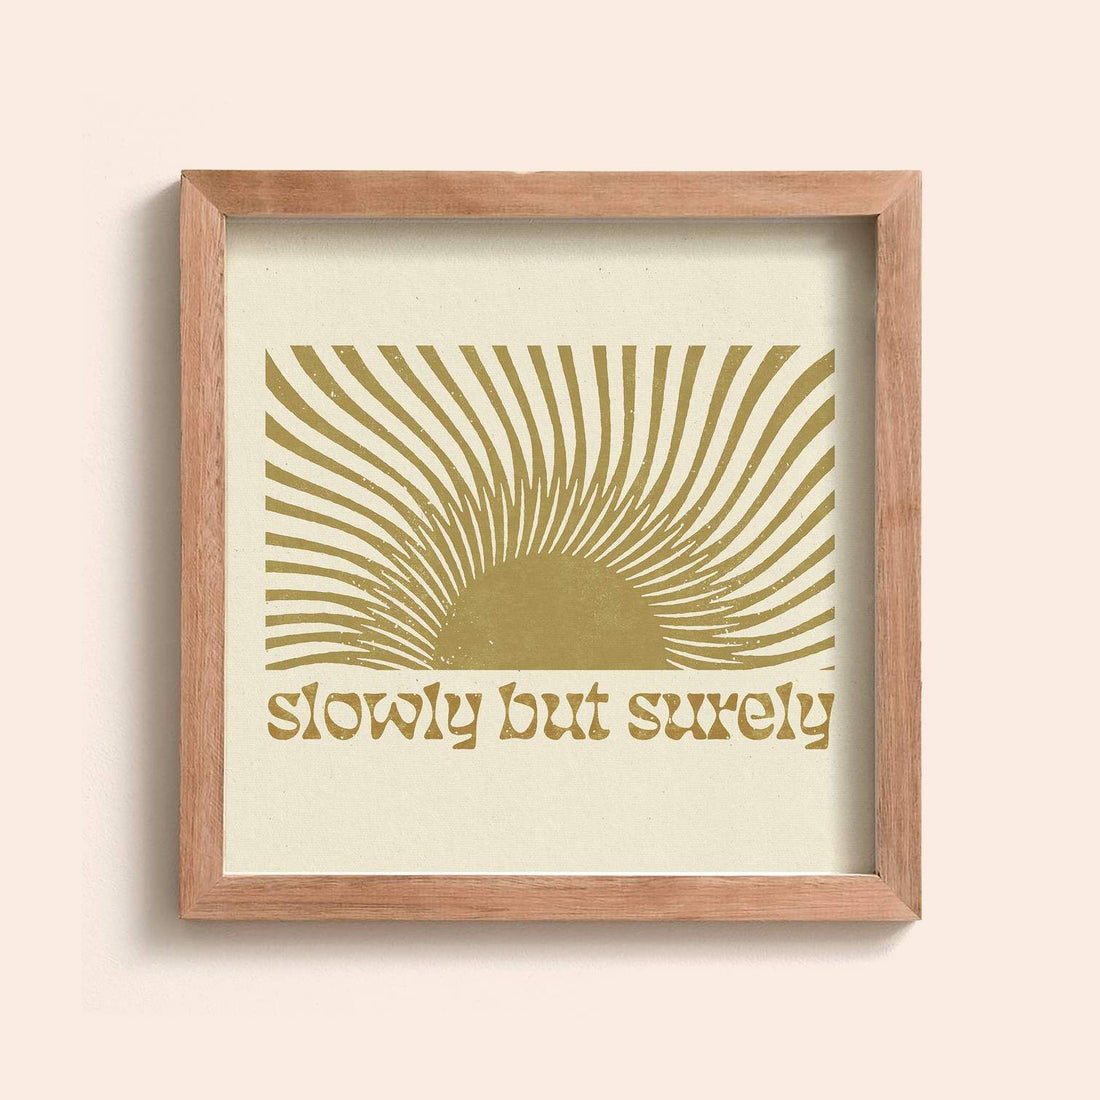 Slowly But Surely Print Thread Spun - Wall Art & Wall Hangings